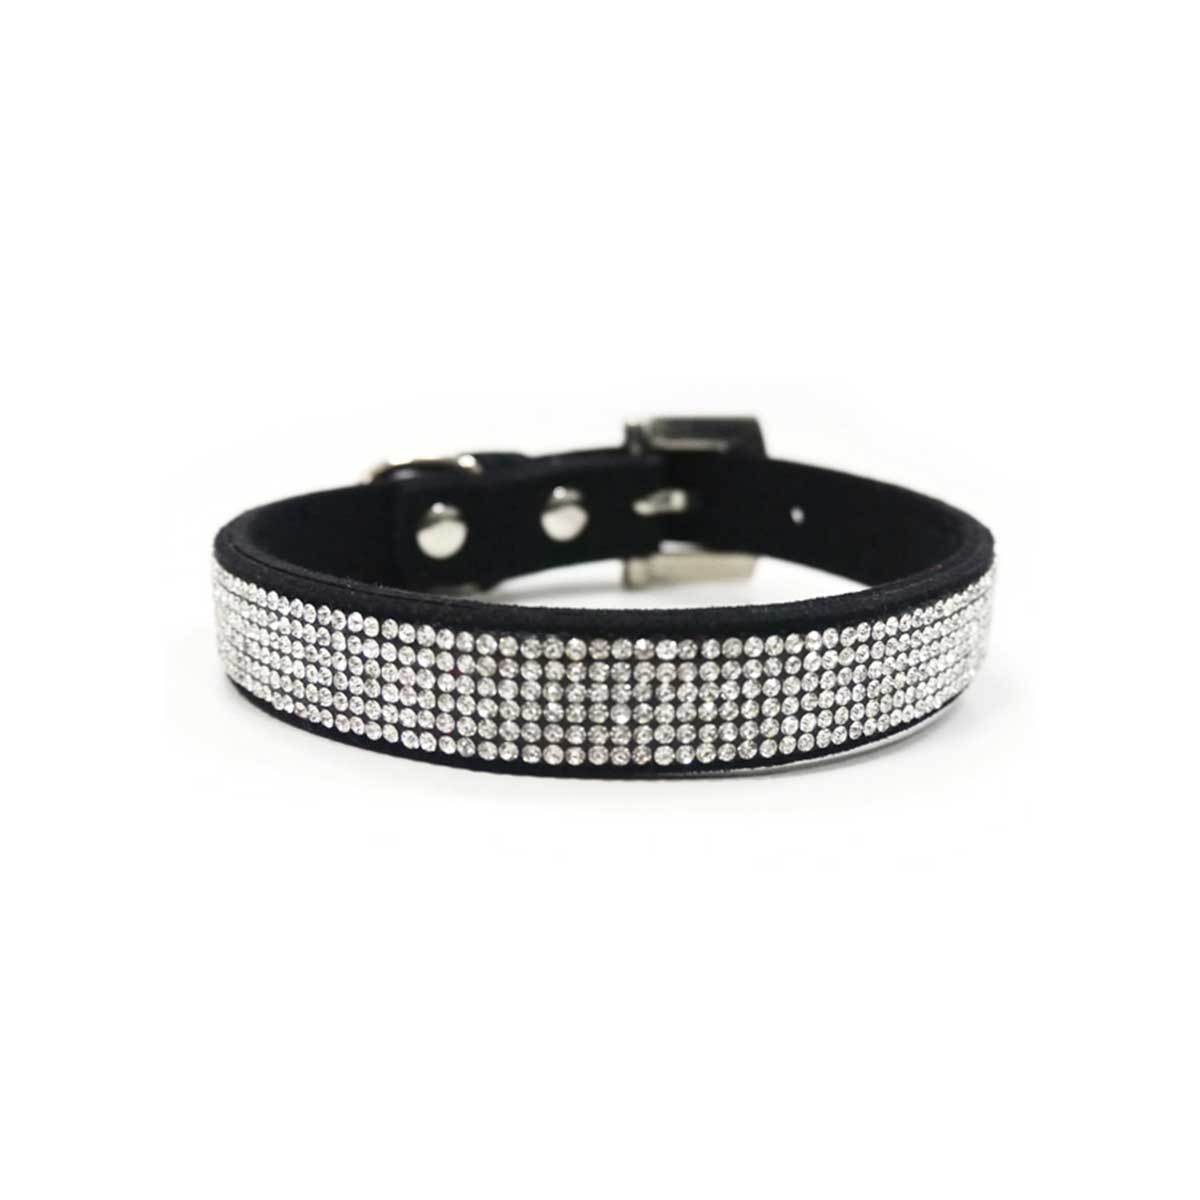 VIP Bling Collar in Black with Rhinestone Studded Buckle | Pawlicious & Company